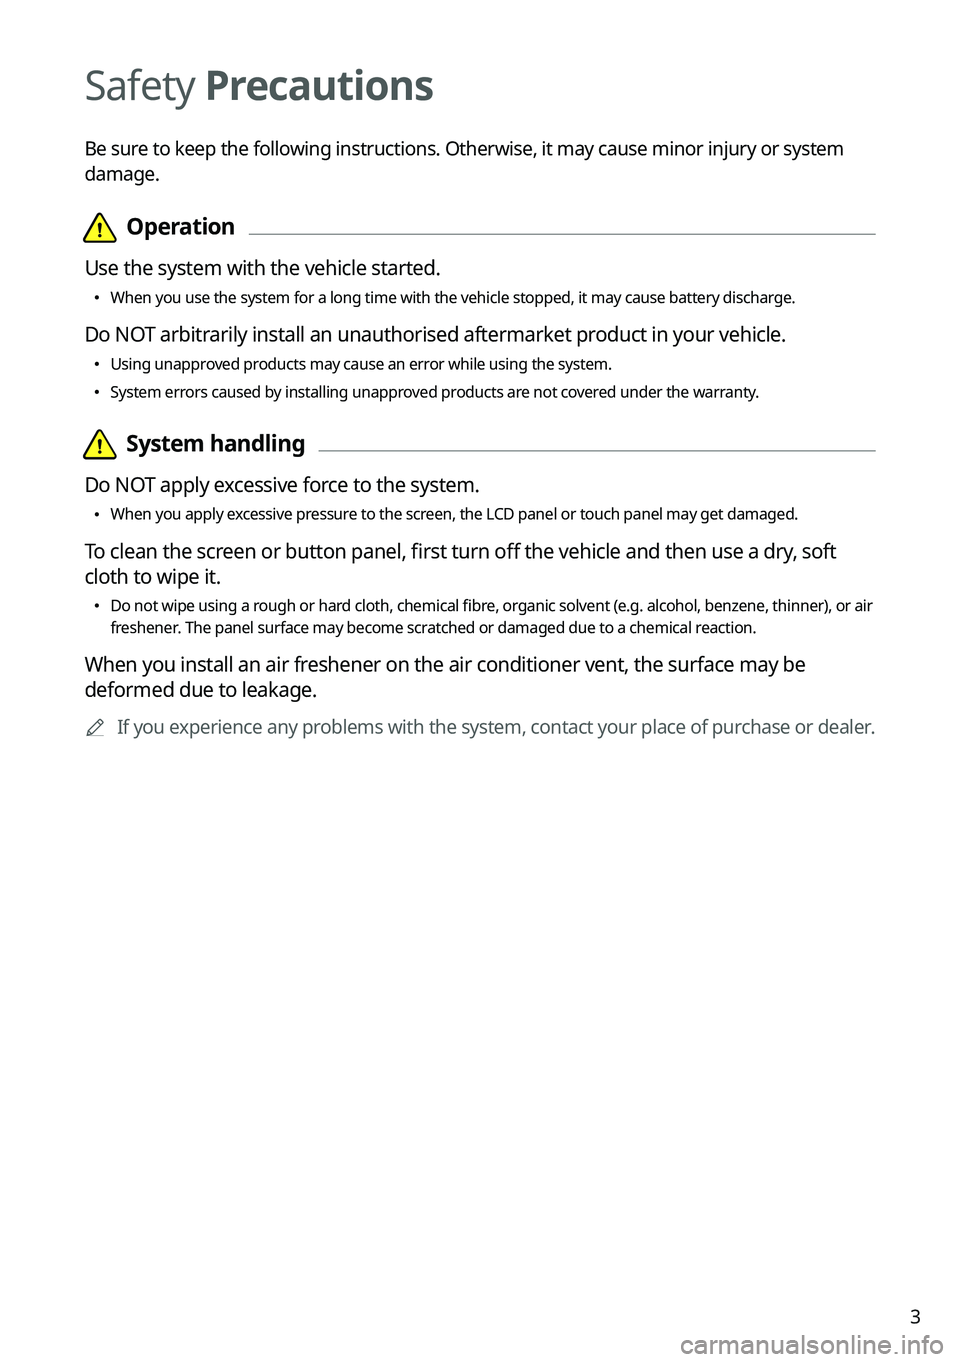 KIA EV6 2022  Navigation System Quick Reference Guide 3
Safety Precautions
Be sure to keep the following instructions. Otherwise, it may cause minor injury or system 
damage. 
  